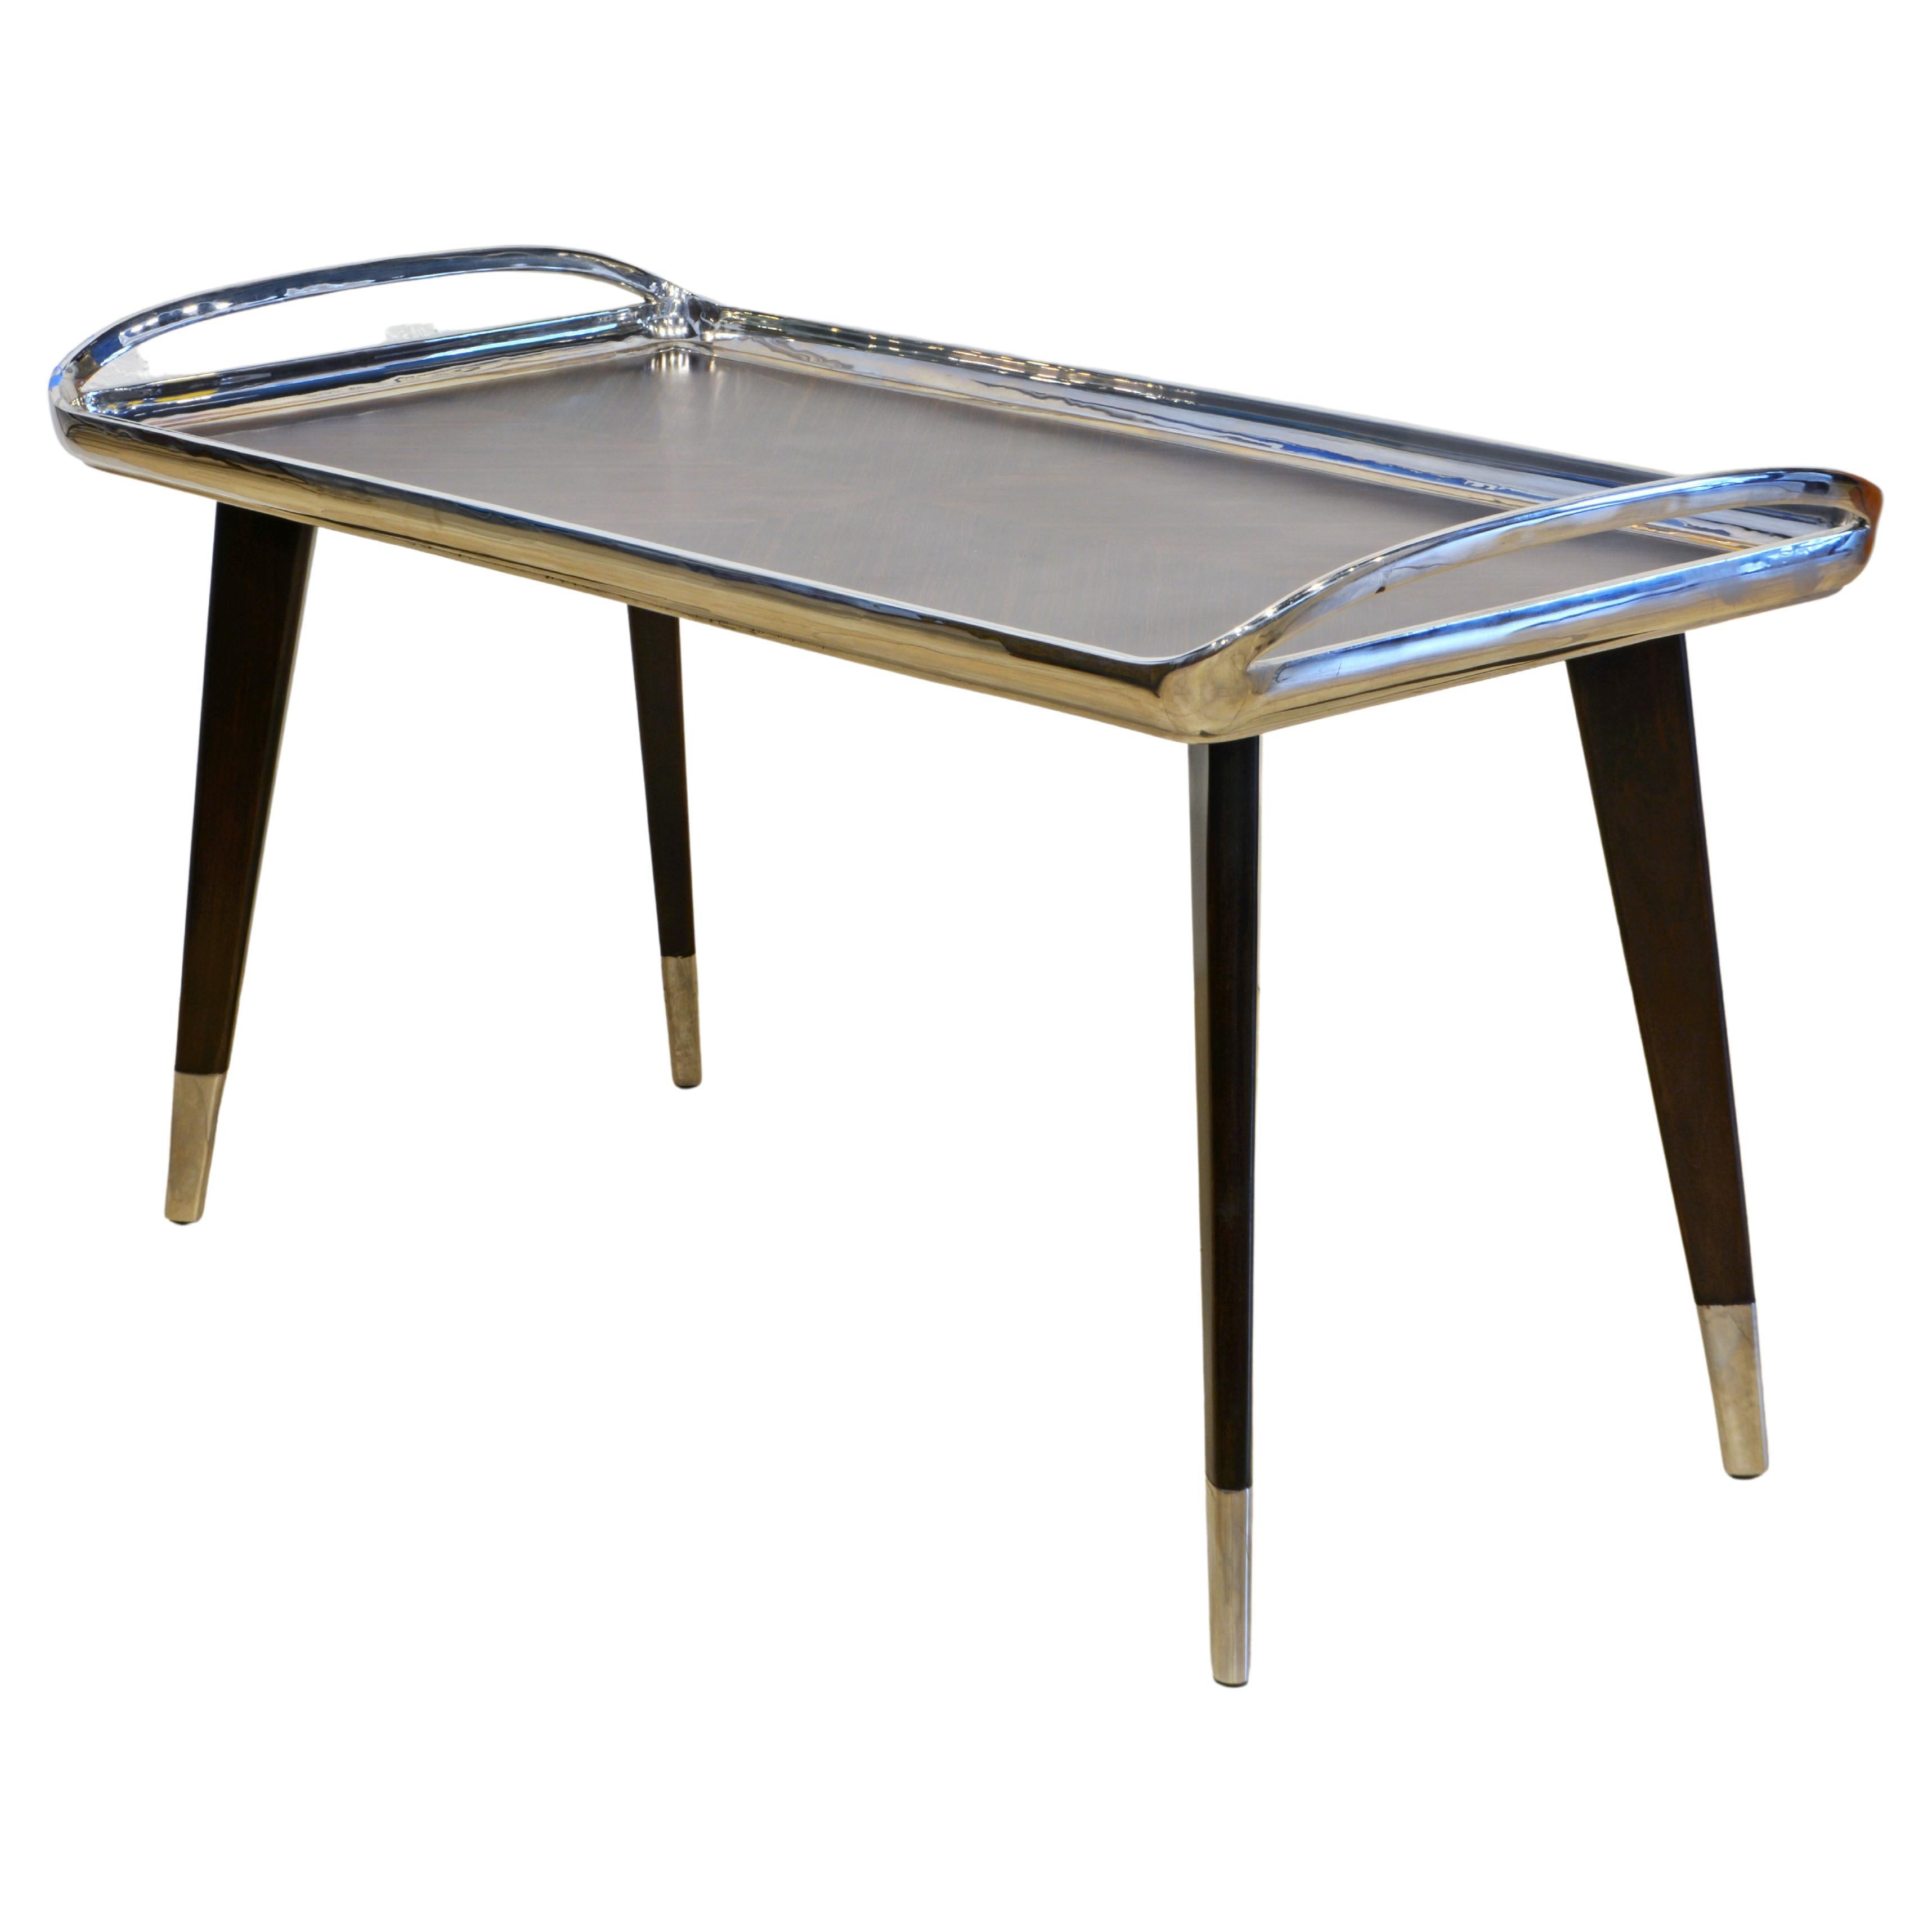 Elegant Polished Steel and Macassar Ebony Cocktail Table by Theodore Alexander